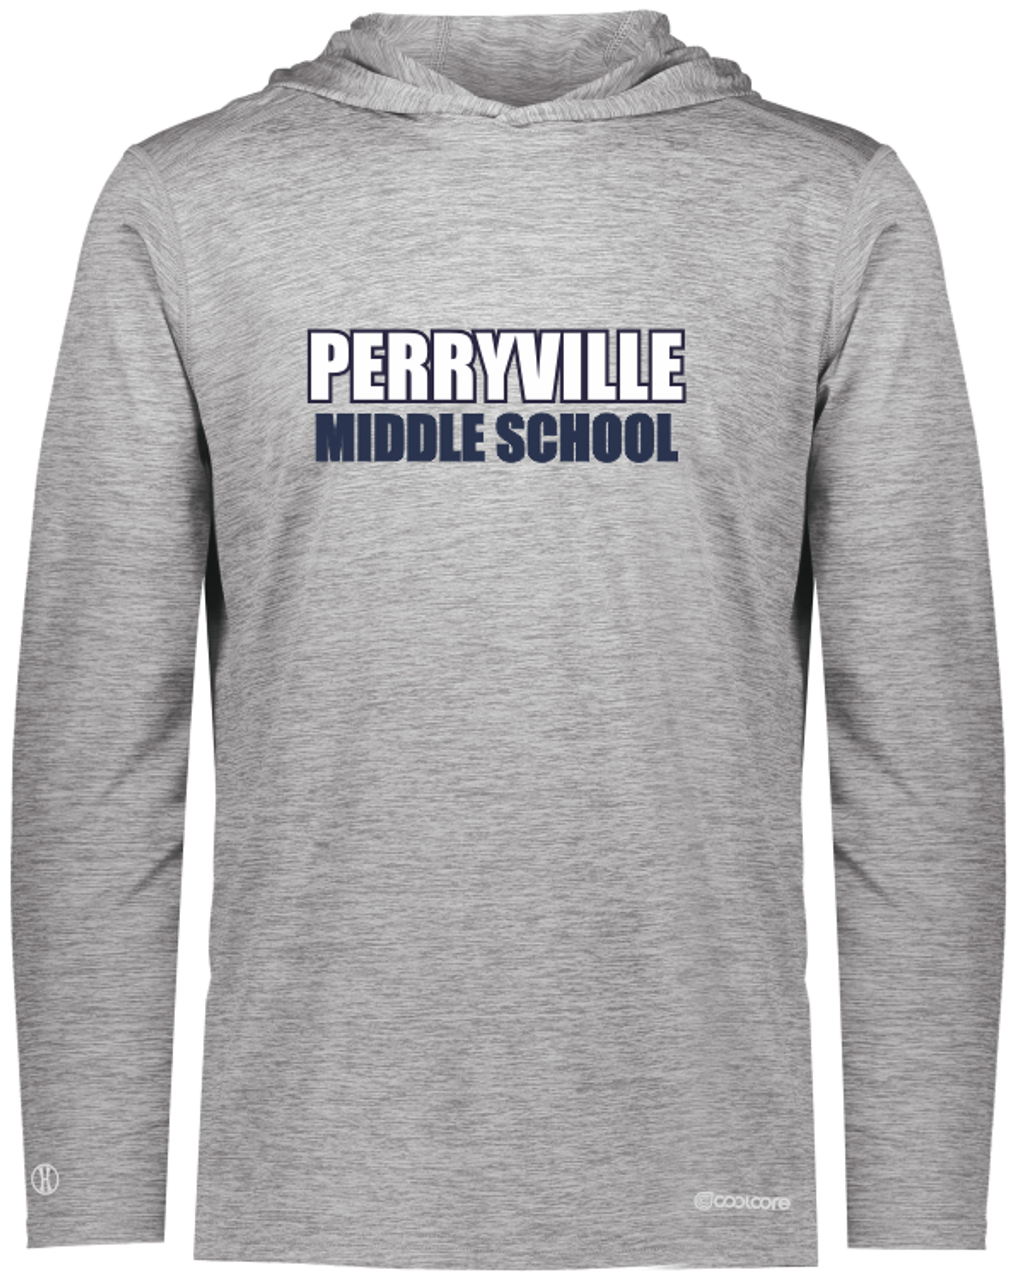 Perryville MS Hooded LS Performance Tee, Gray